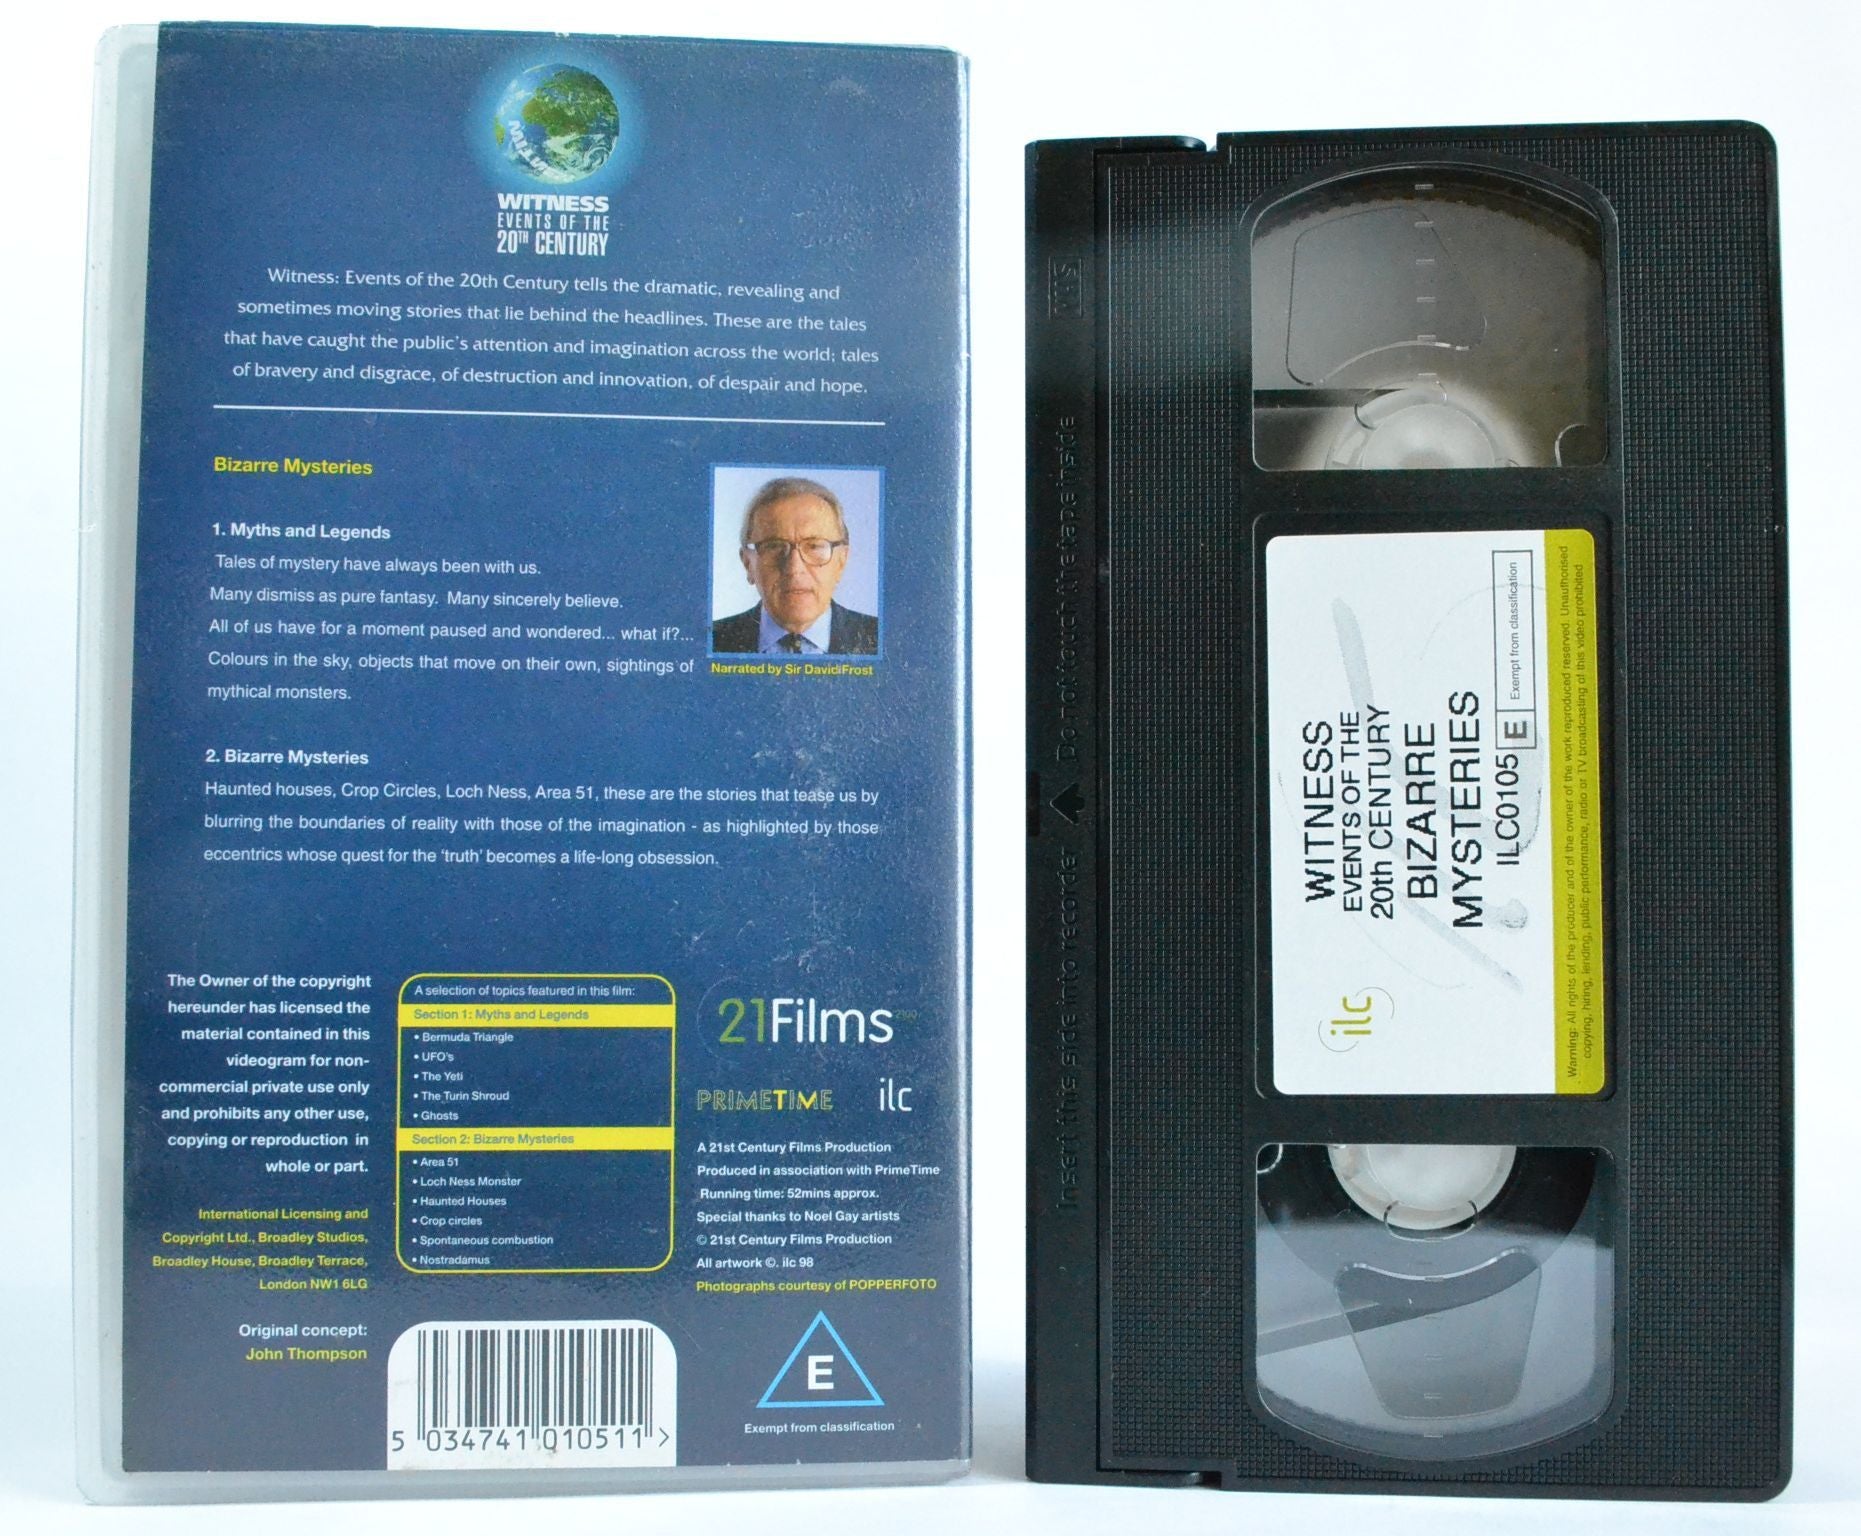 Bizarre Mysteries: Sir David Frost; Loch Ness - Area 51 - Haunted Houses - VHS-